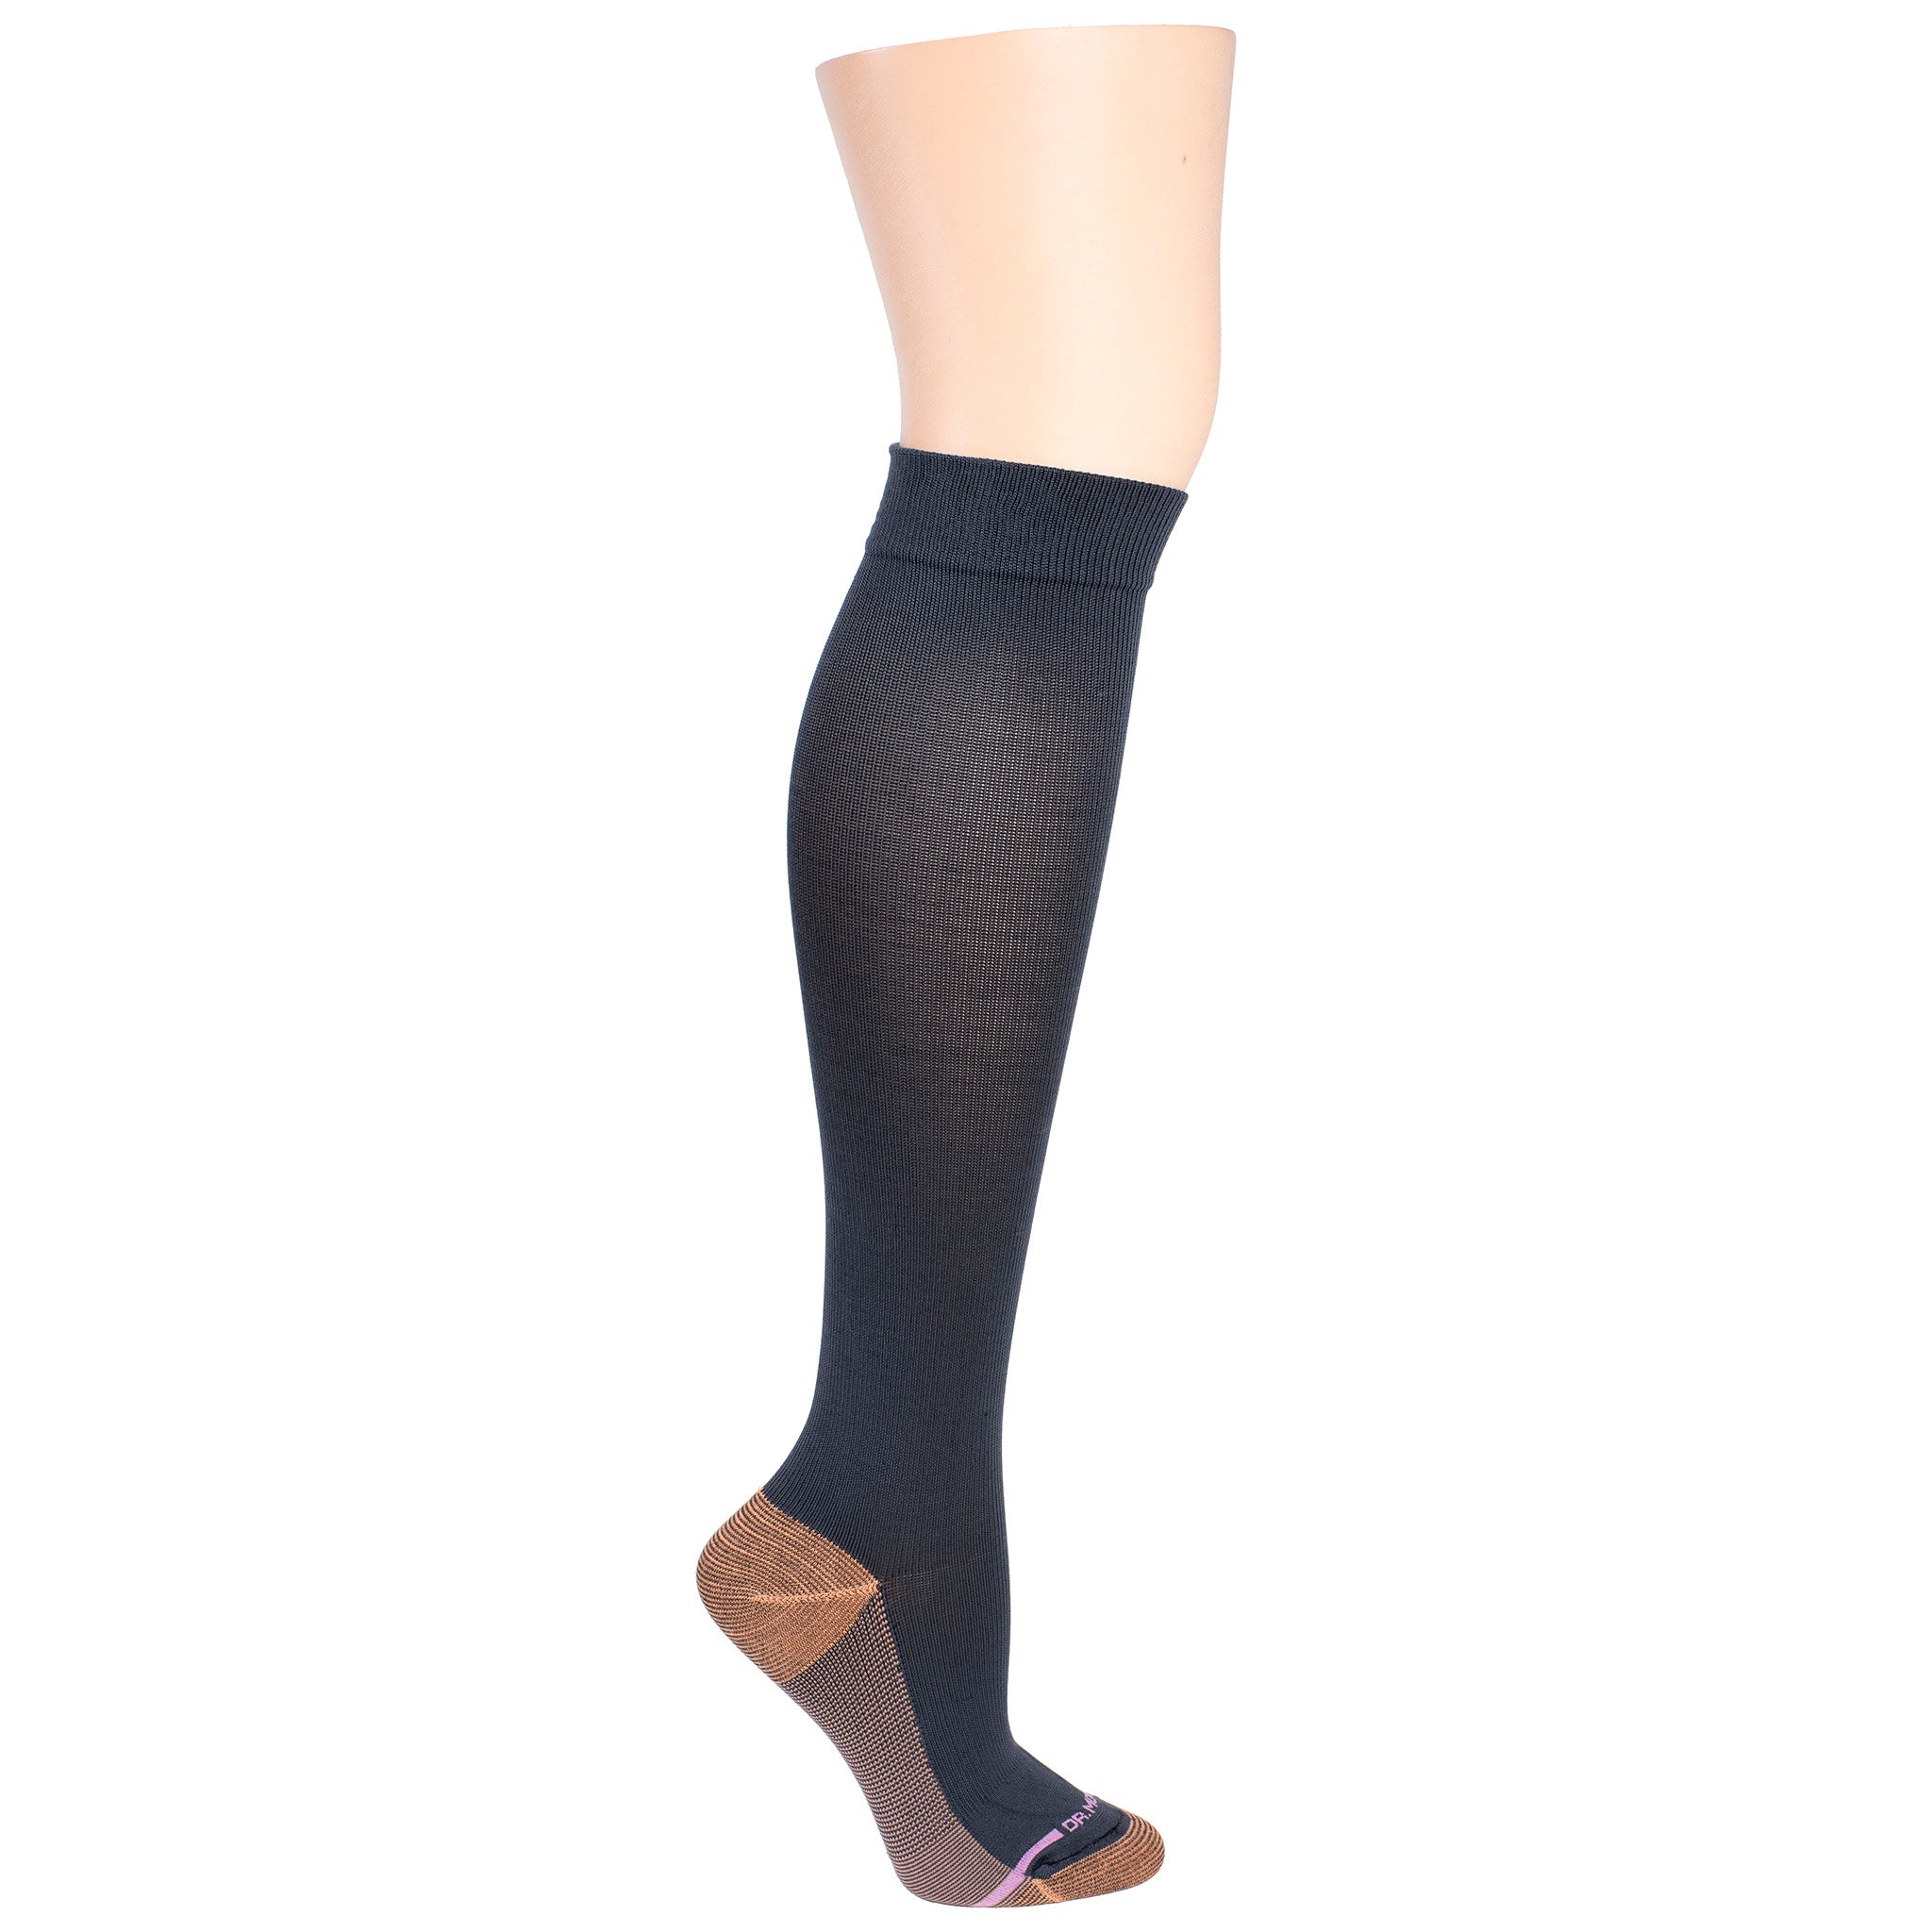 KNEE HIGH COMPRESSION STOCKINGS, Products